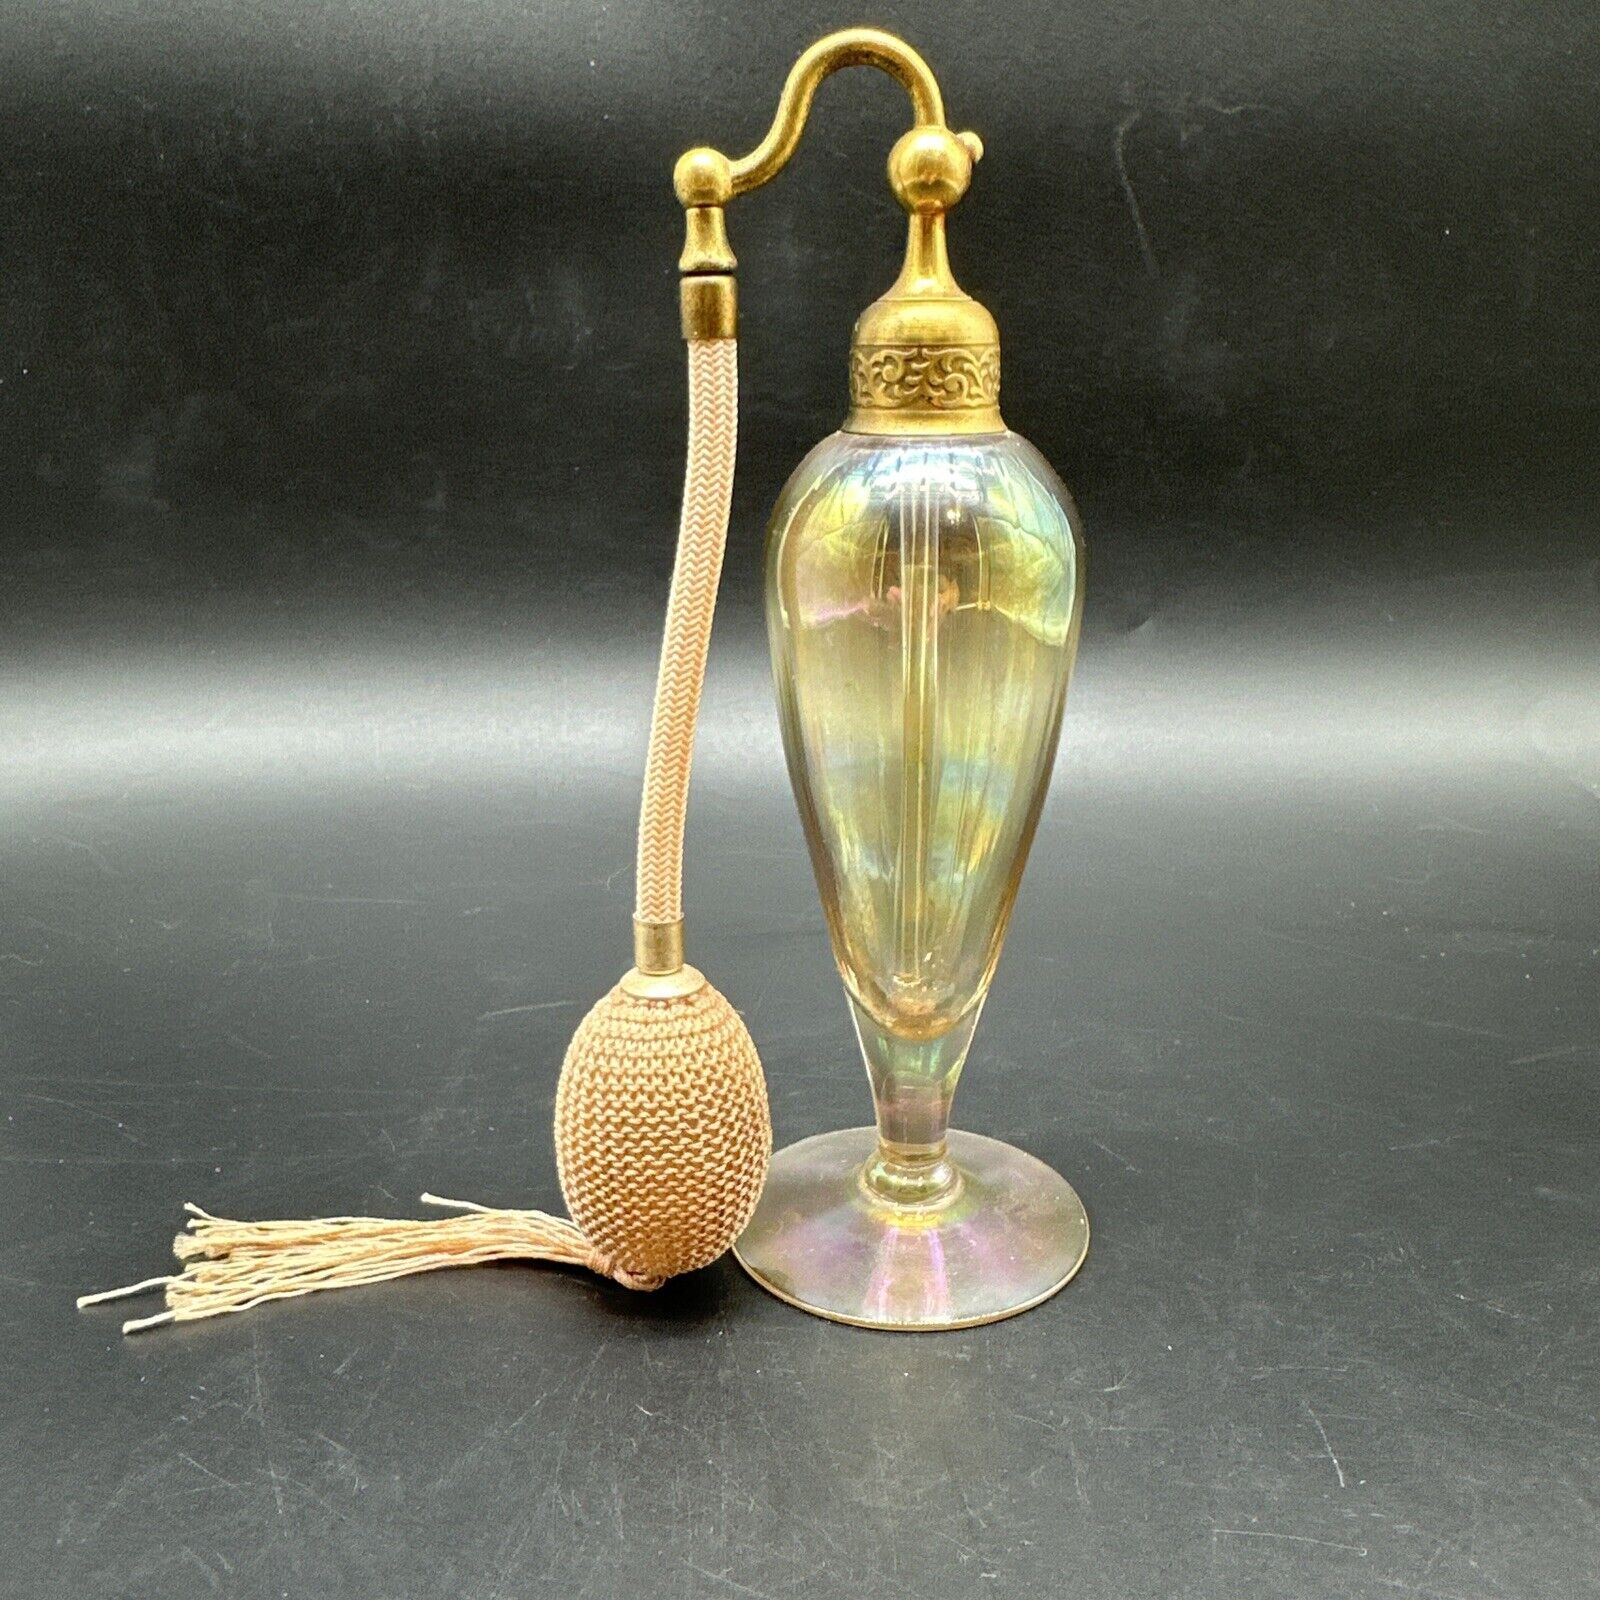 Antique DeVilbiss Perfumizer Iridescent Gold Glass Body By Cambridge Glass Comp